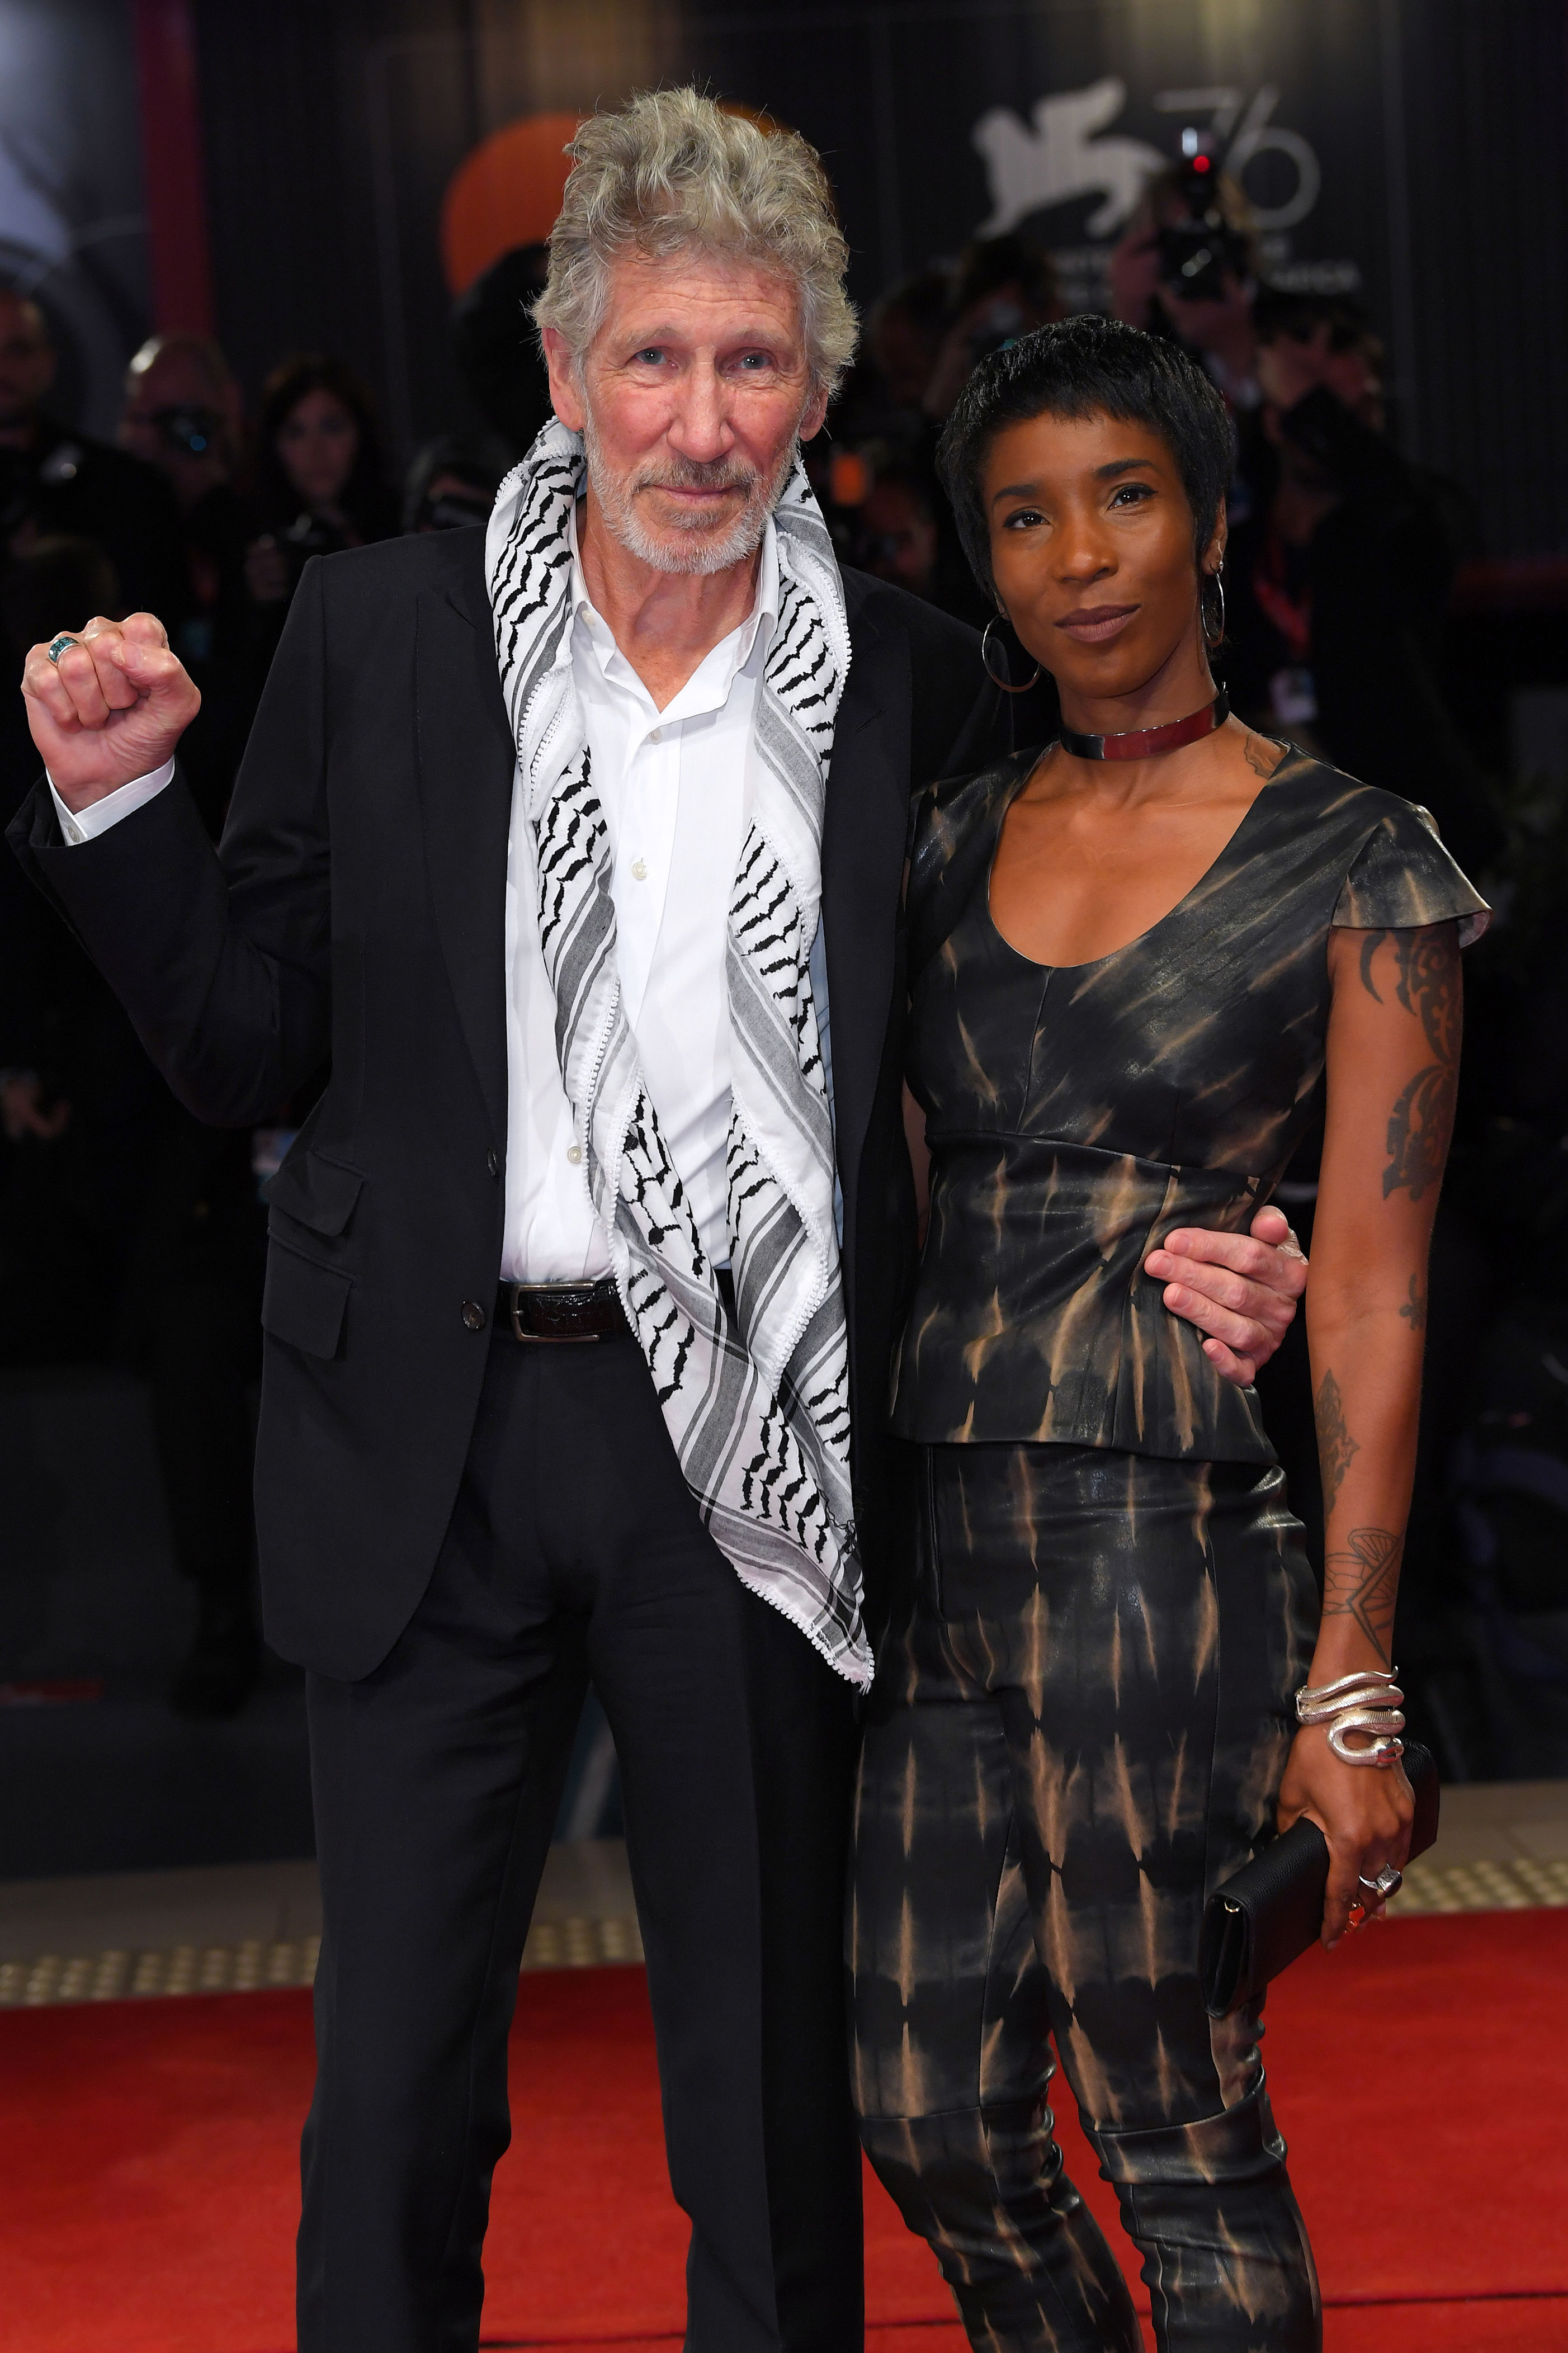 <p>Pink Floyd co-founder Roger Waters is 35 years older than fifth wife Kamilah Chavis, whom <a href="https://www.wonderwall.com/celebrity/couples/celebrity-weddings-of-2021-famous-people-who-got-married-this-year-465325.gallery?photoId=489159">he married</a> in October 2021 at 78 after five years of dating. (<a href="https://www.wonderwall.com/celebrity/couples/celebrity-couples-hookups-first-dates-how-they-met-got-together-fell-in-love-3007128.gallery?photoId=489159">They met when she was his driver </a>at the 2016 Coachella Valley Music & Arts Festival in California.)<span> "I'm so happy, finally a keeper," the rock star captioned a </span><a href="https://www.instagram.com/p/CU_MRKuMq0I/">slideshow</a><span> of wedding photos.</span></p>